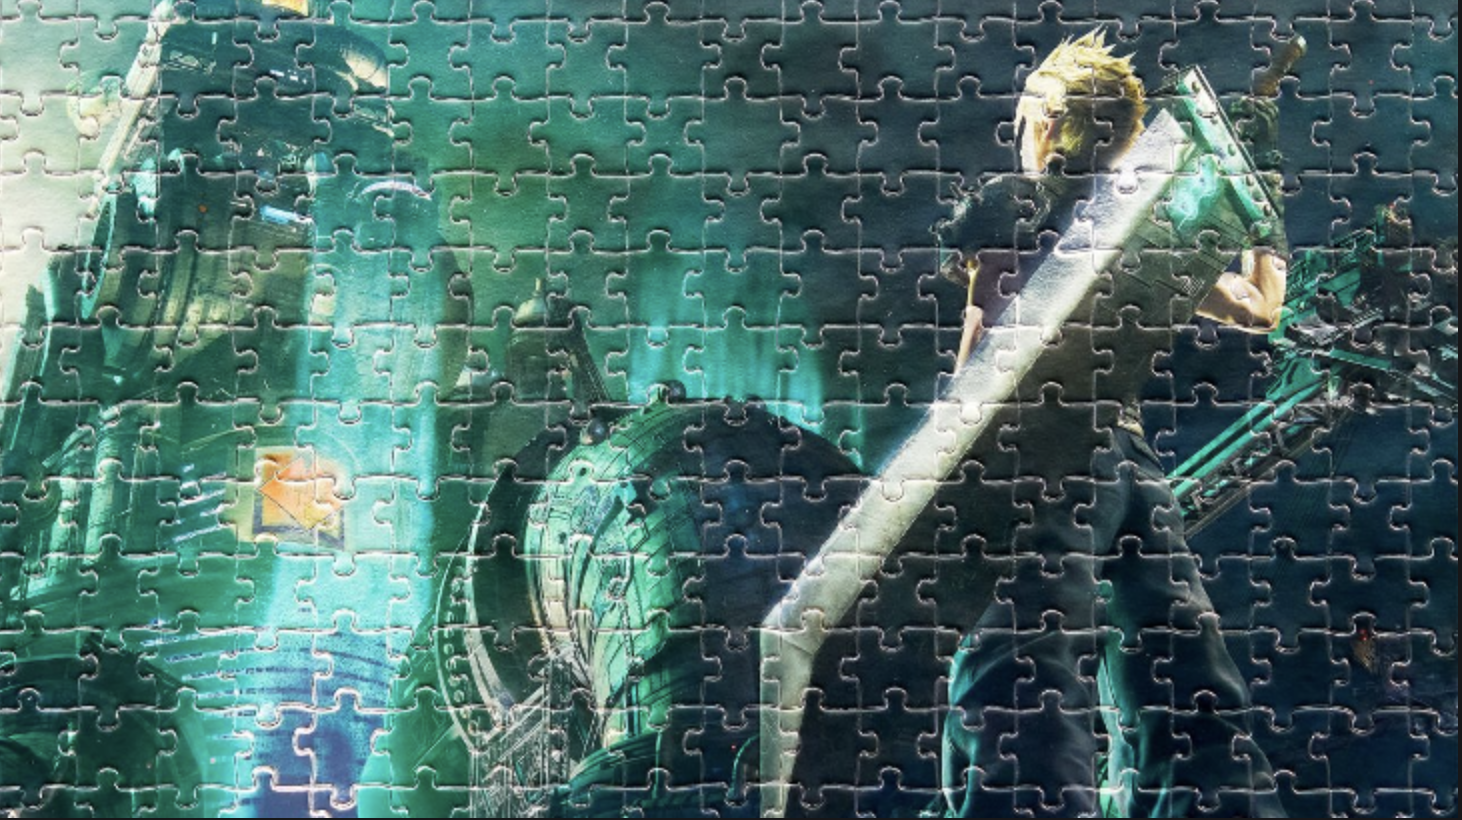 Final Fantasy VII Jigsaw Puzzle Designs Feature Aerith, Cloud, and Tifa